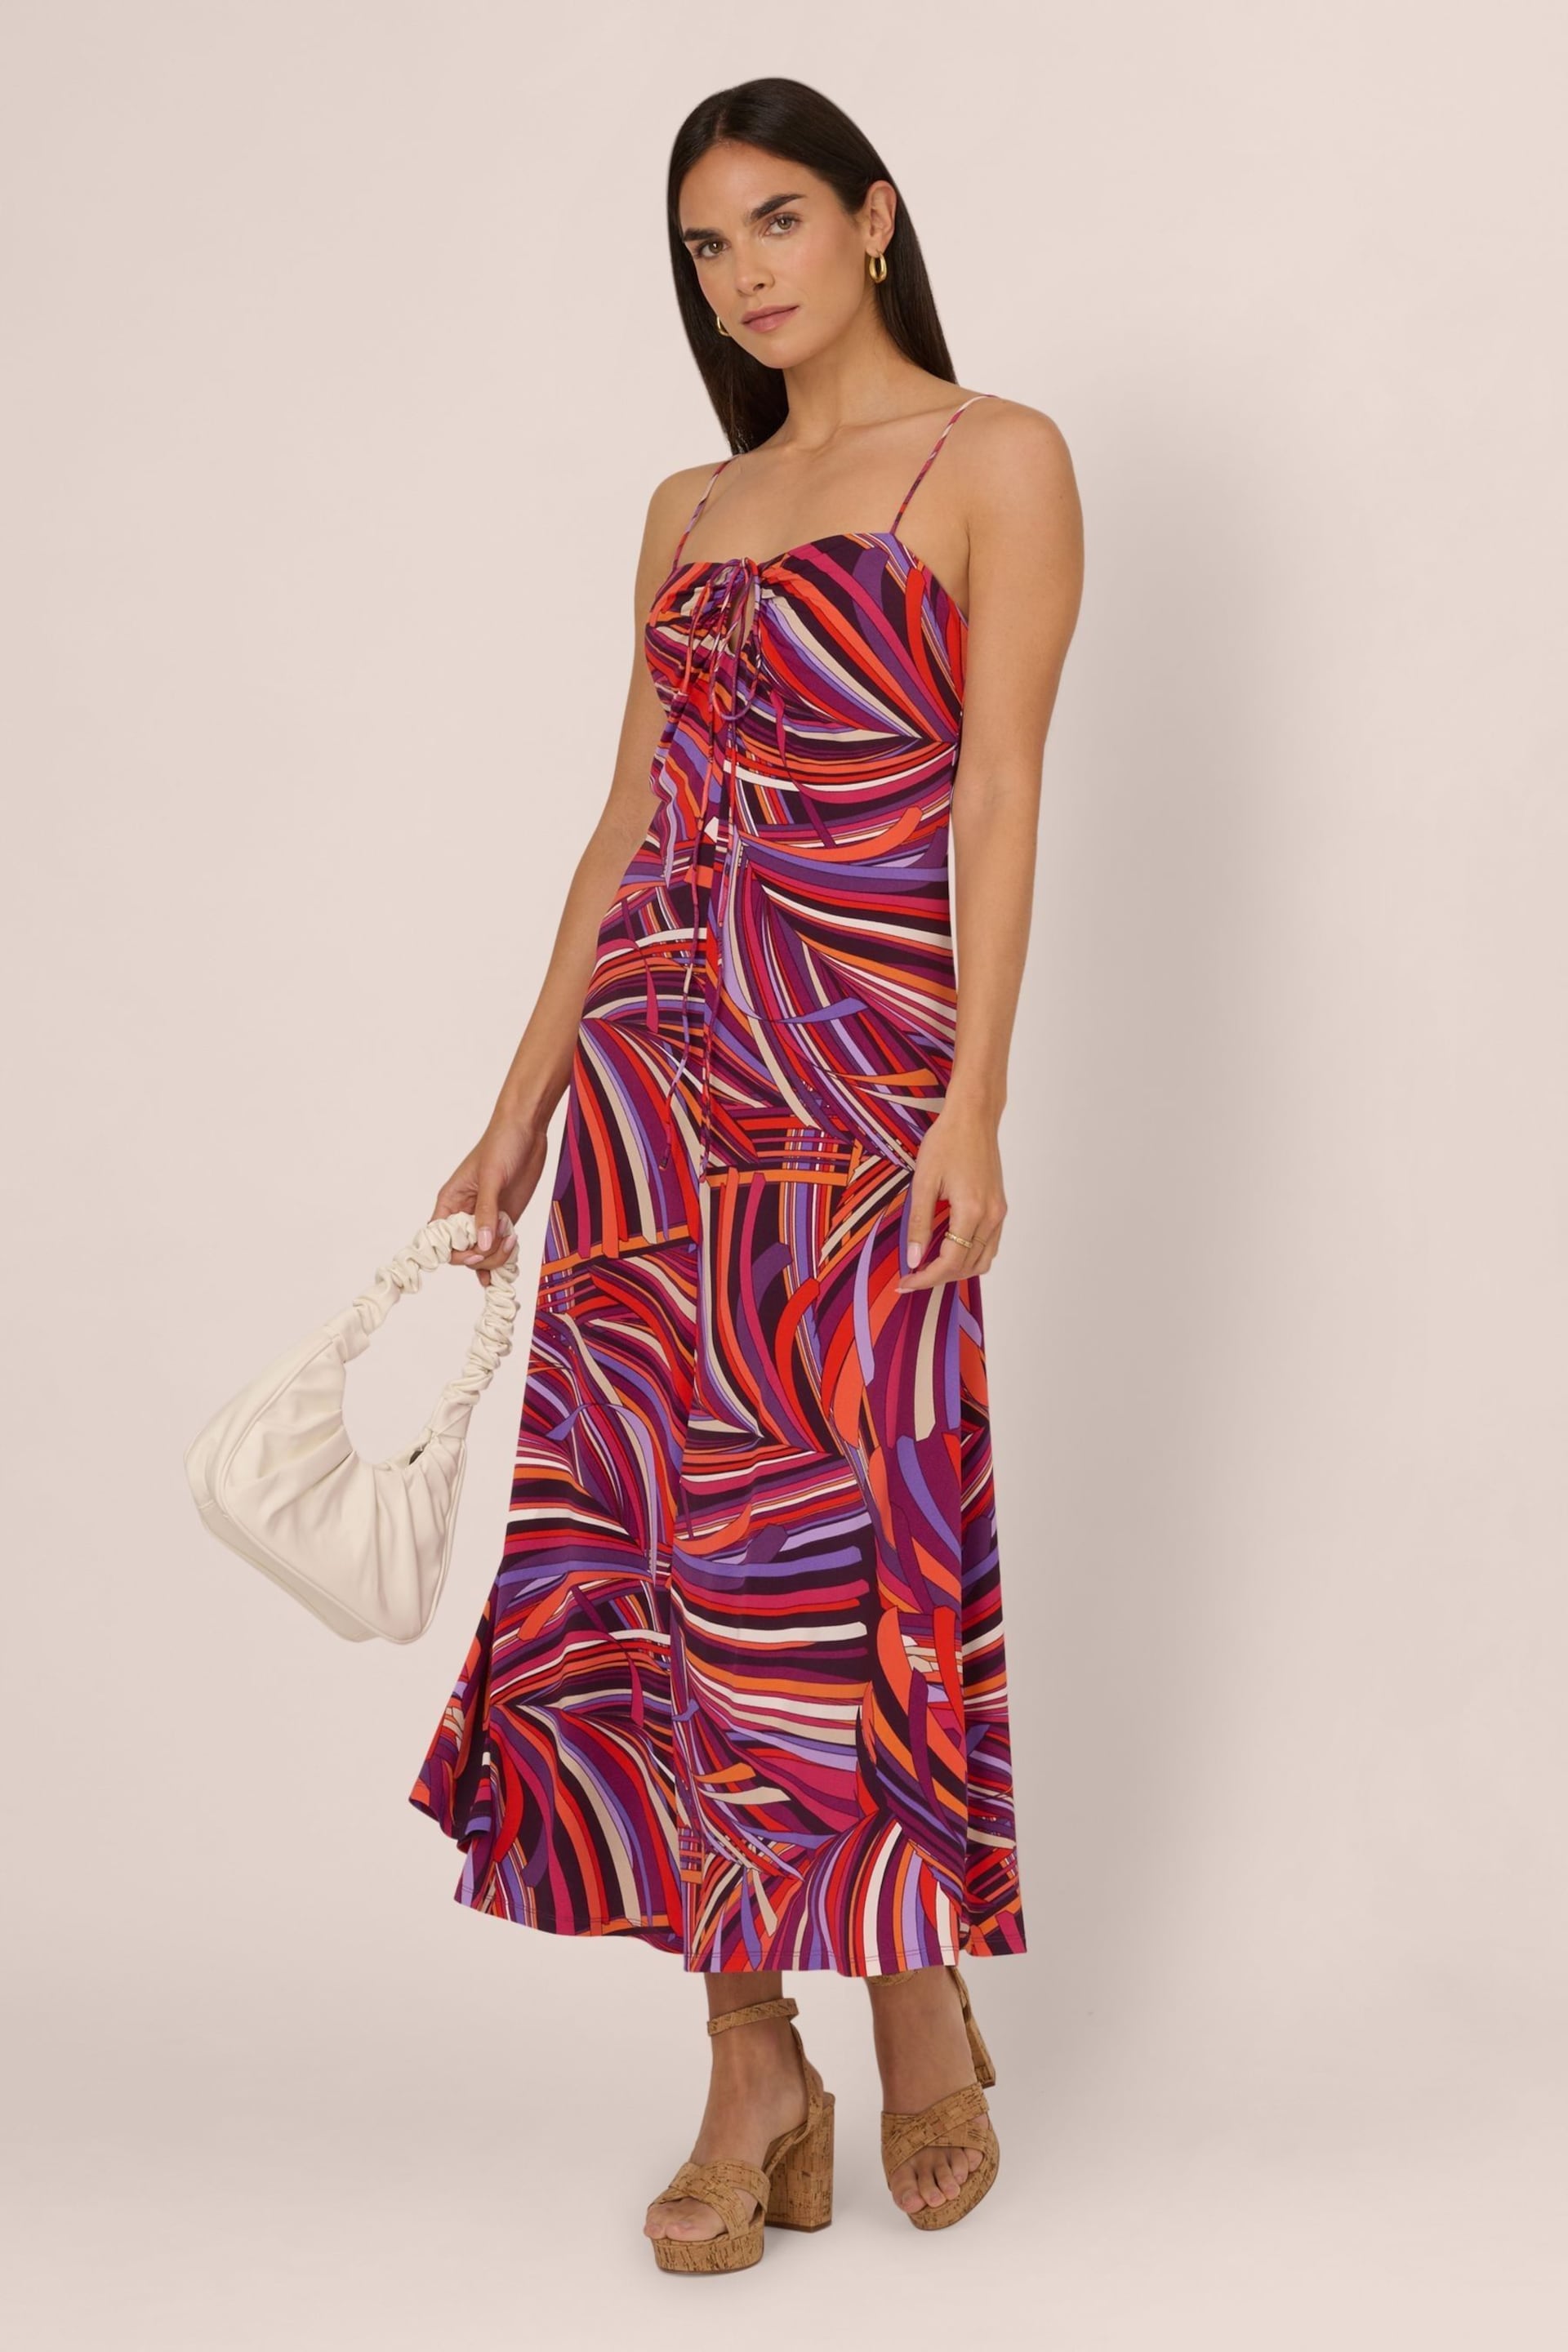 Adrianna Papell Purple Printed Jersey Dress - Image 3 of 7